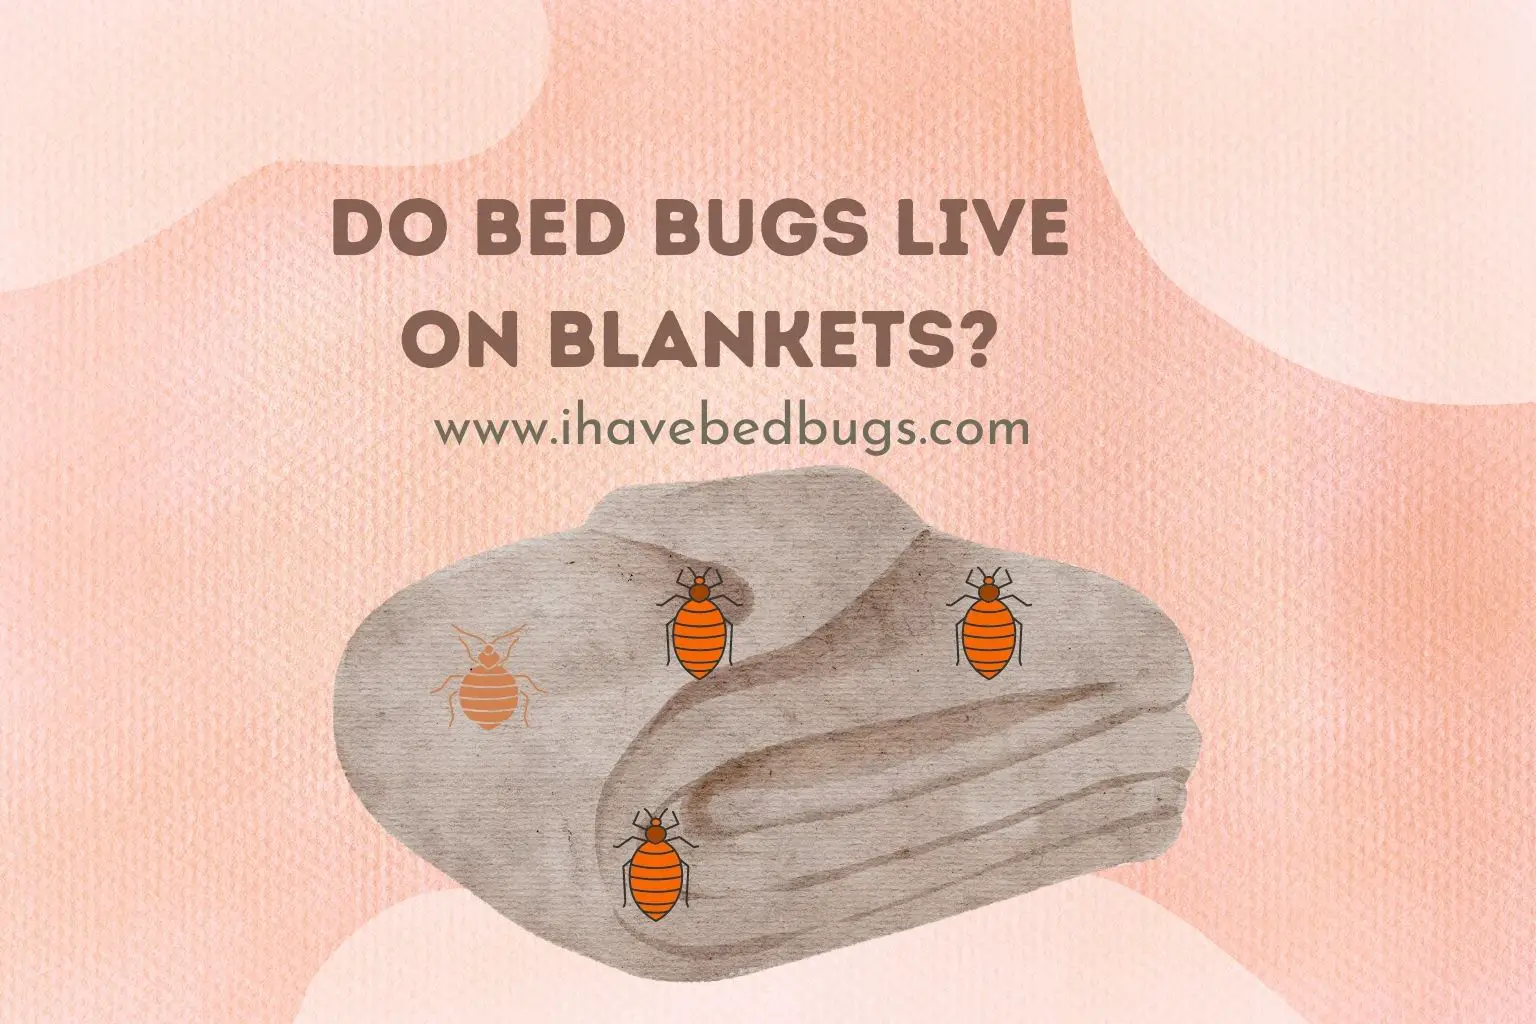 Do bed bugs live on blankets